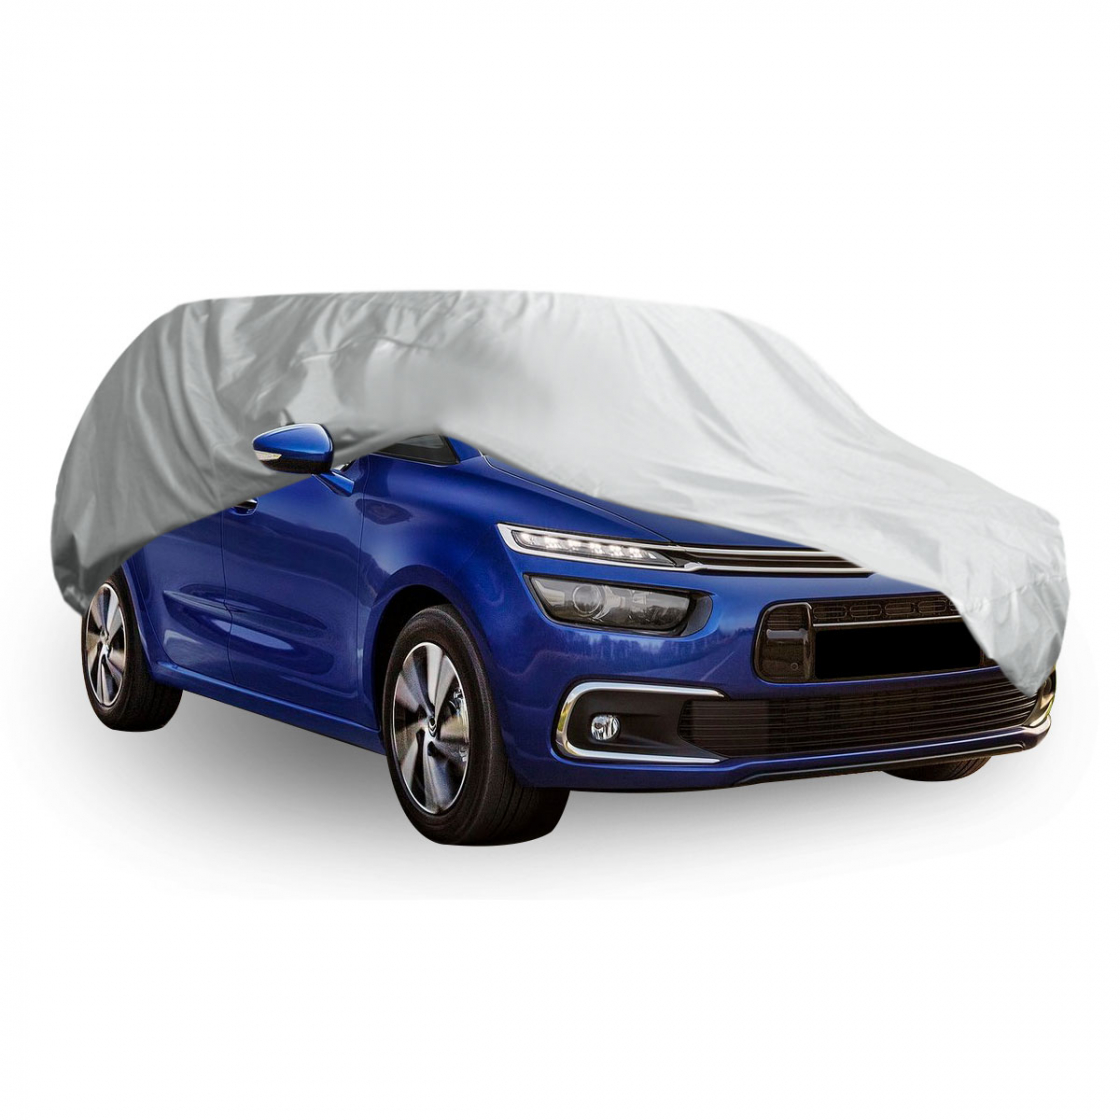 C4 - Citroën tailor-made car covers: for indoor or outdoor use